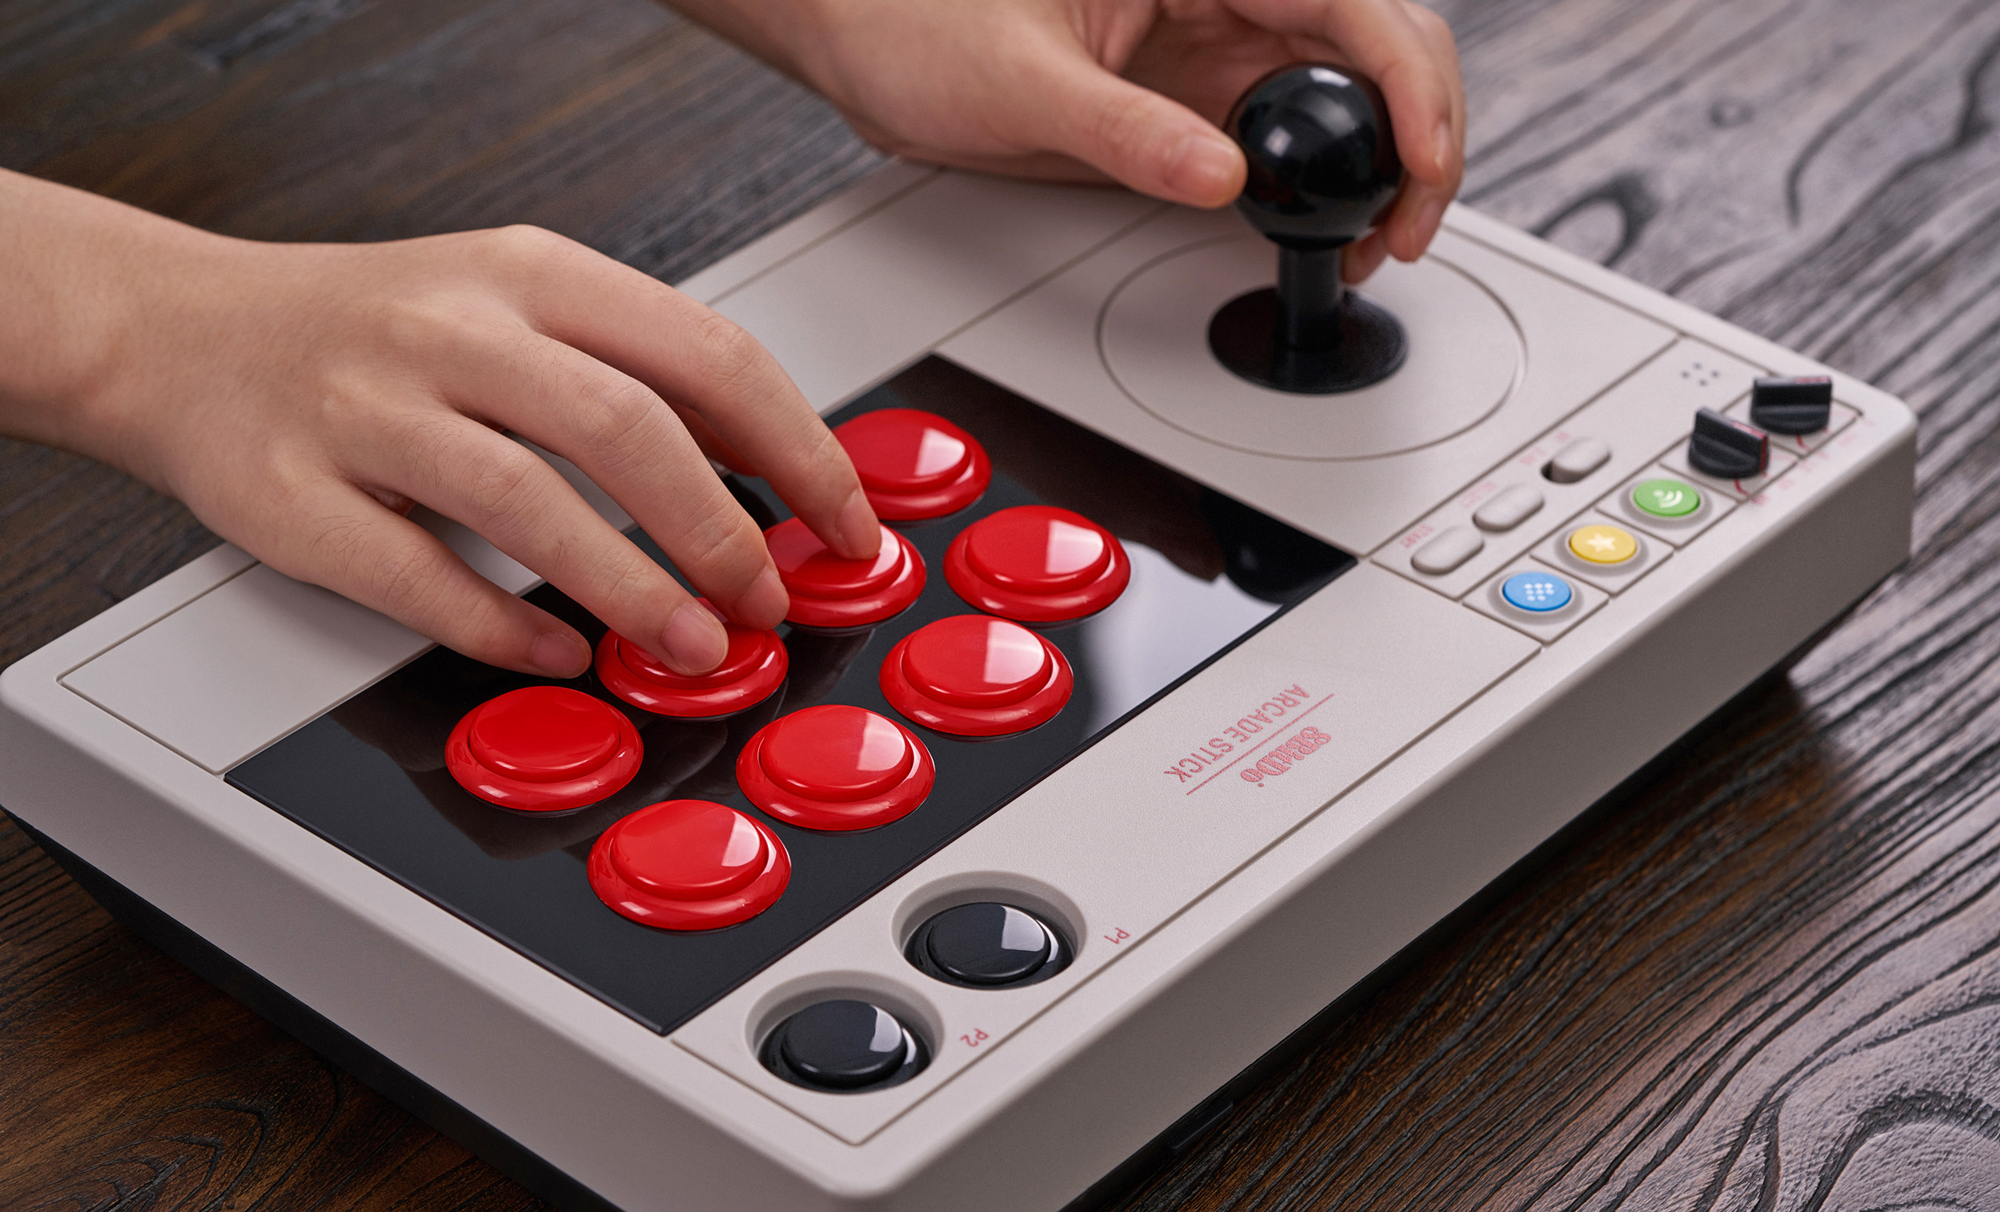 An extra pair of macro buttons can be programmed using the 8BitDo Ultimate Software. (Image: 8BitDo)